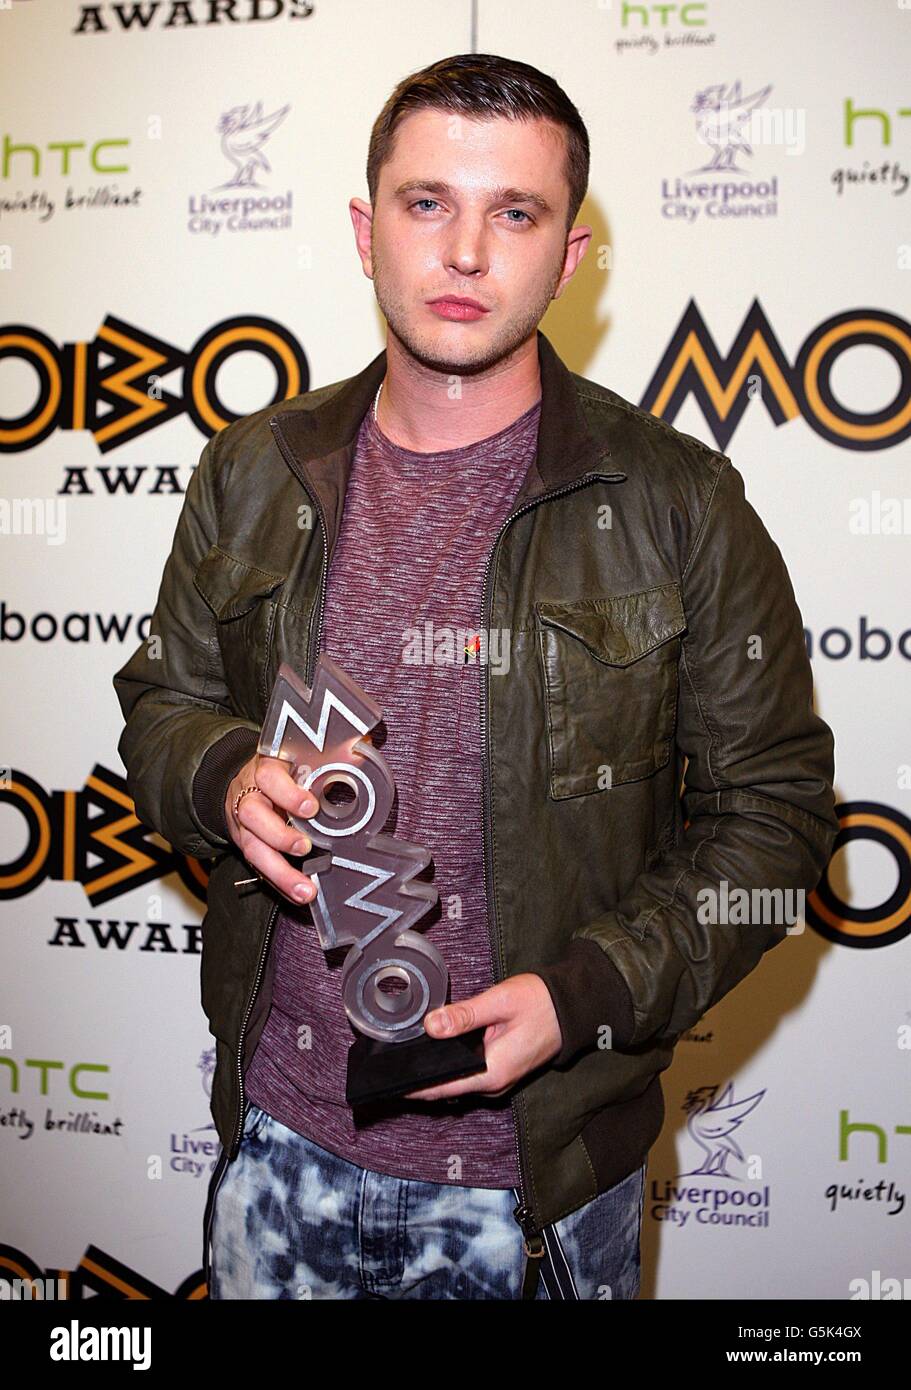 Ben Drew aka Plan B with the award for Best Grime/Hip Hop Act, at the MOBO Awards 2012, at the Echo Arena, Liverpool. Stock Photo